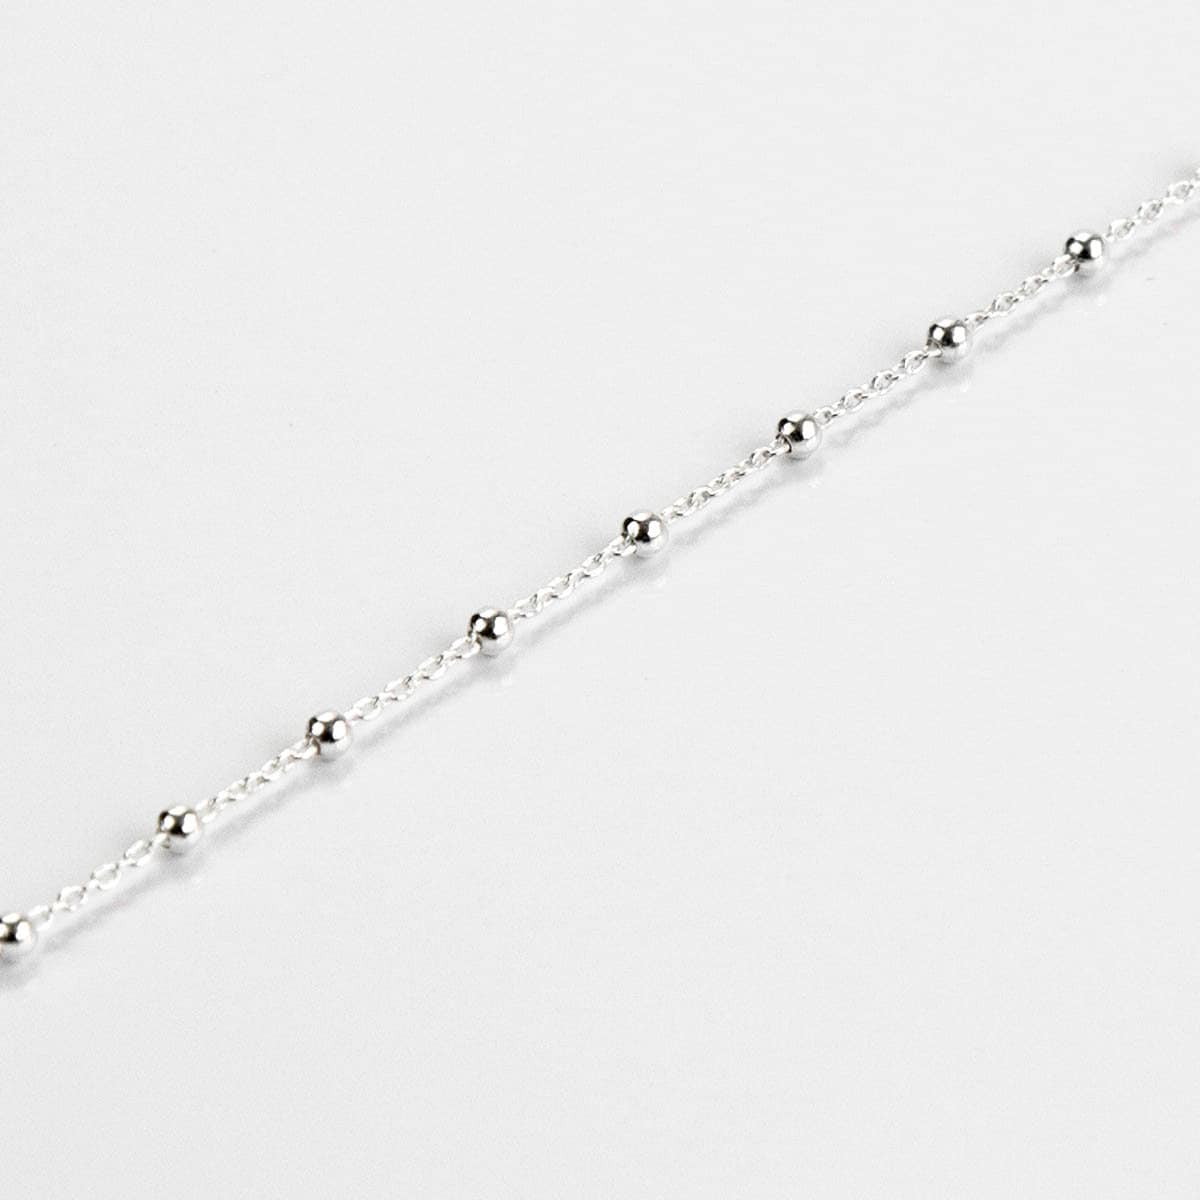 Solid 925 Sterling Silver Italian Ball Bead Chain Necklace, Made in Italy,  5mm Sterling Silver Ball Chain, Ball Necklace Chain 